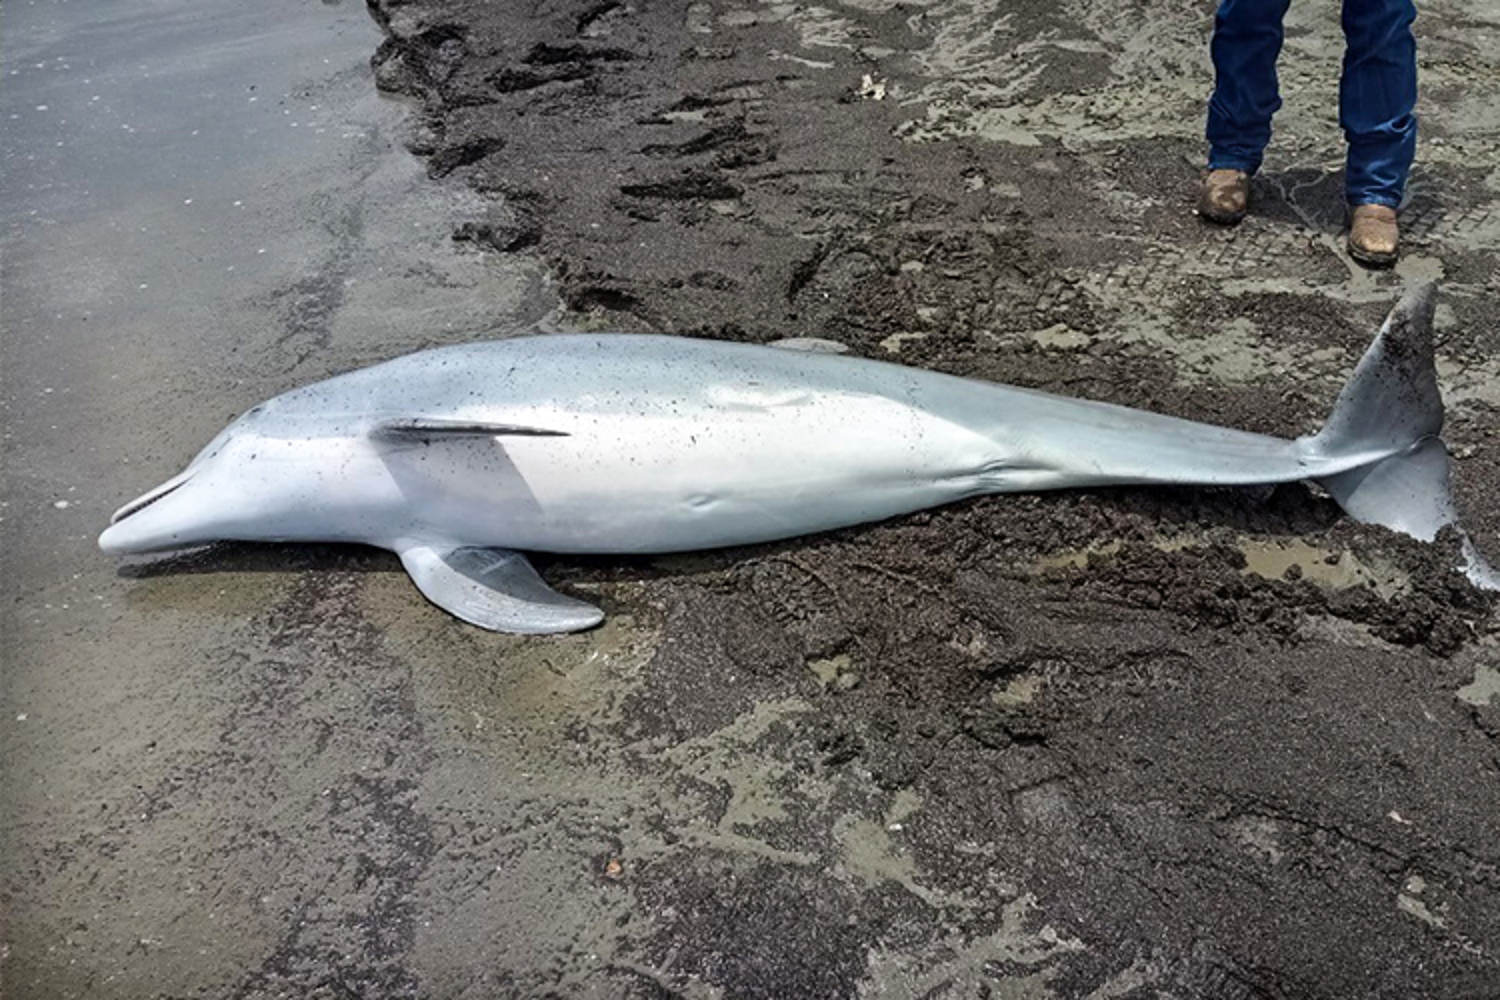 Dolphin dead after being repeatedly shot in Louisiana, $20,000 reward offered for info